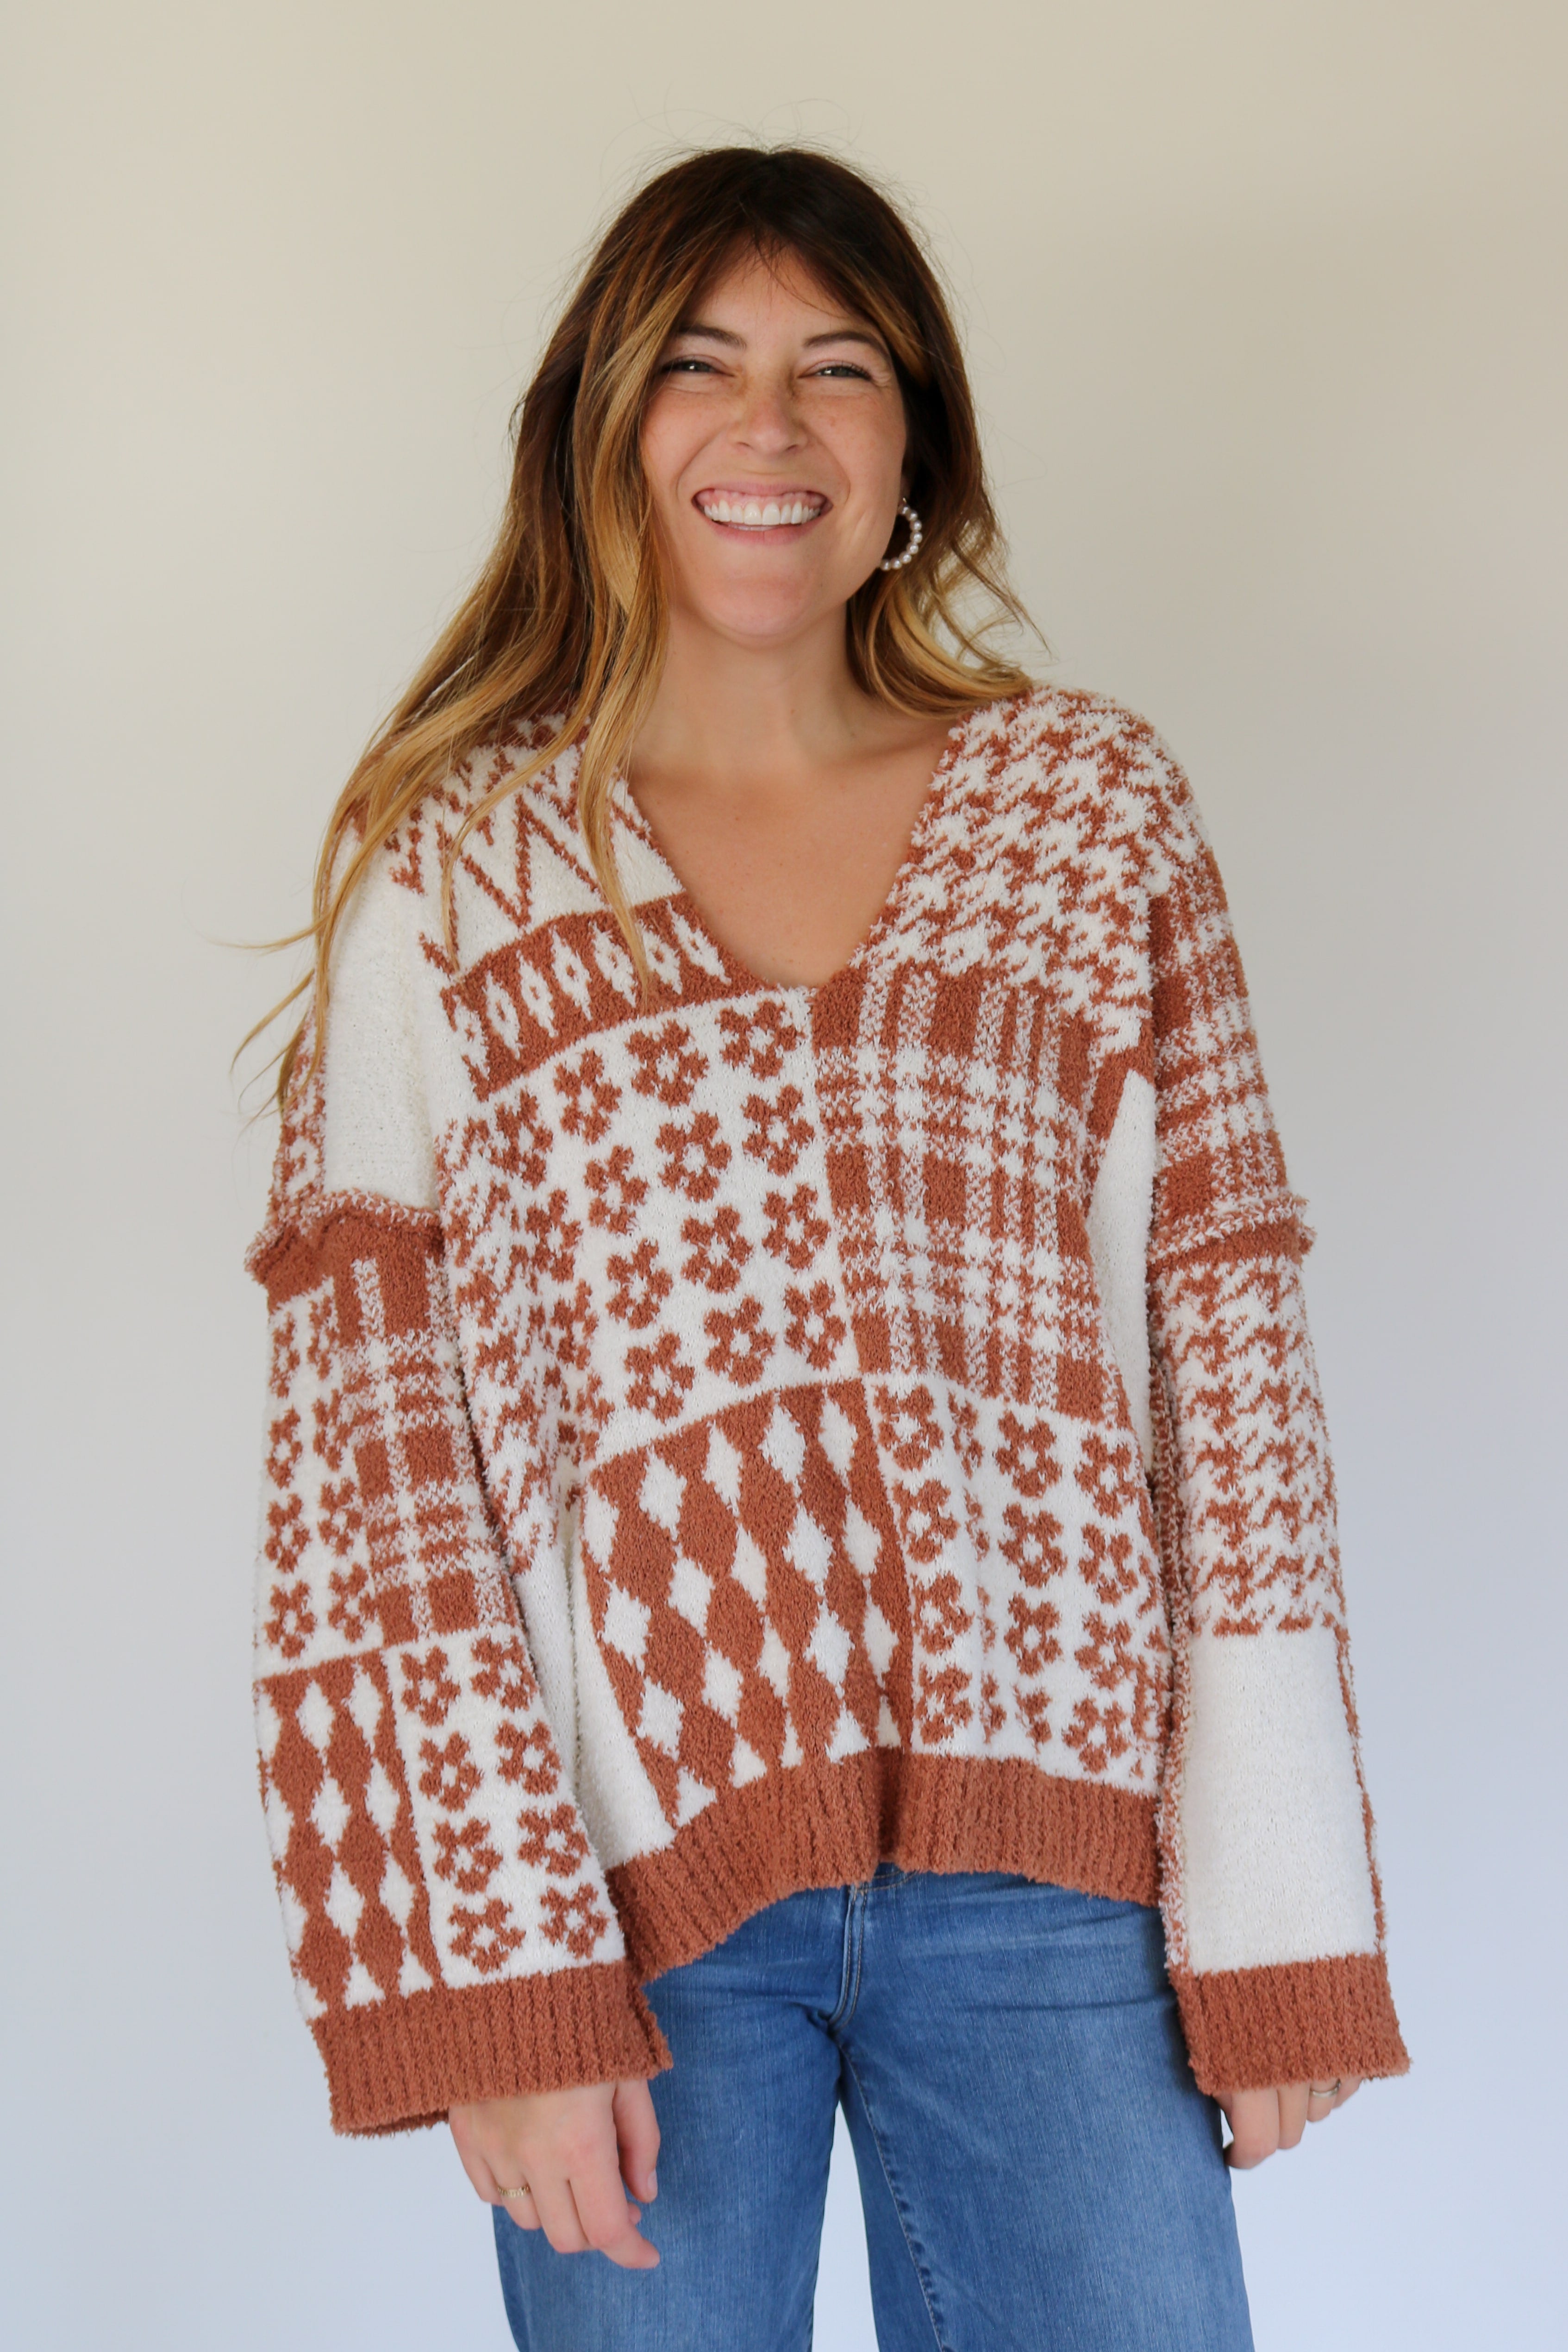 Oversized Patterned Sweater in Brown*